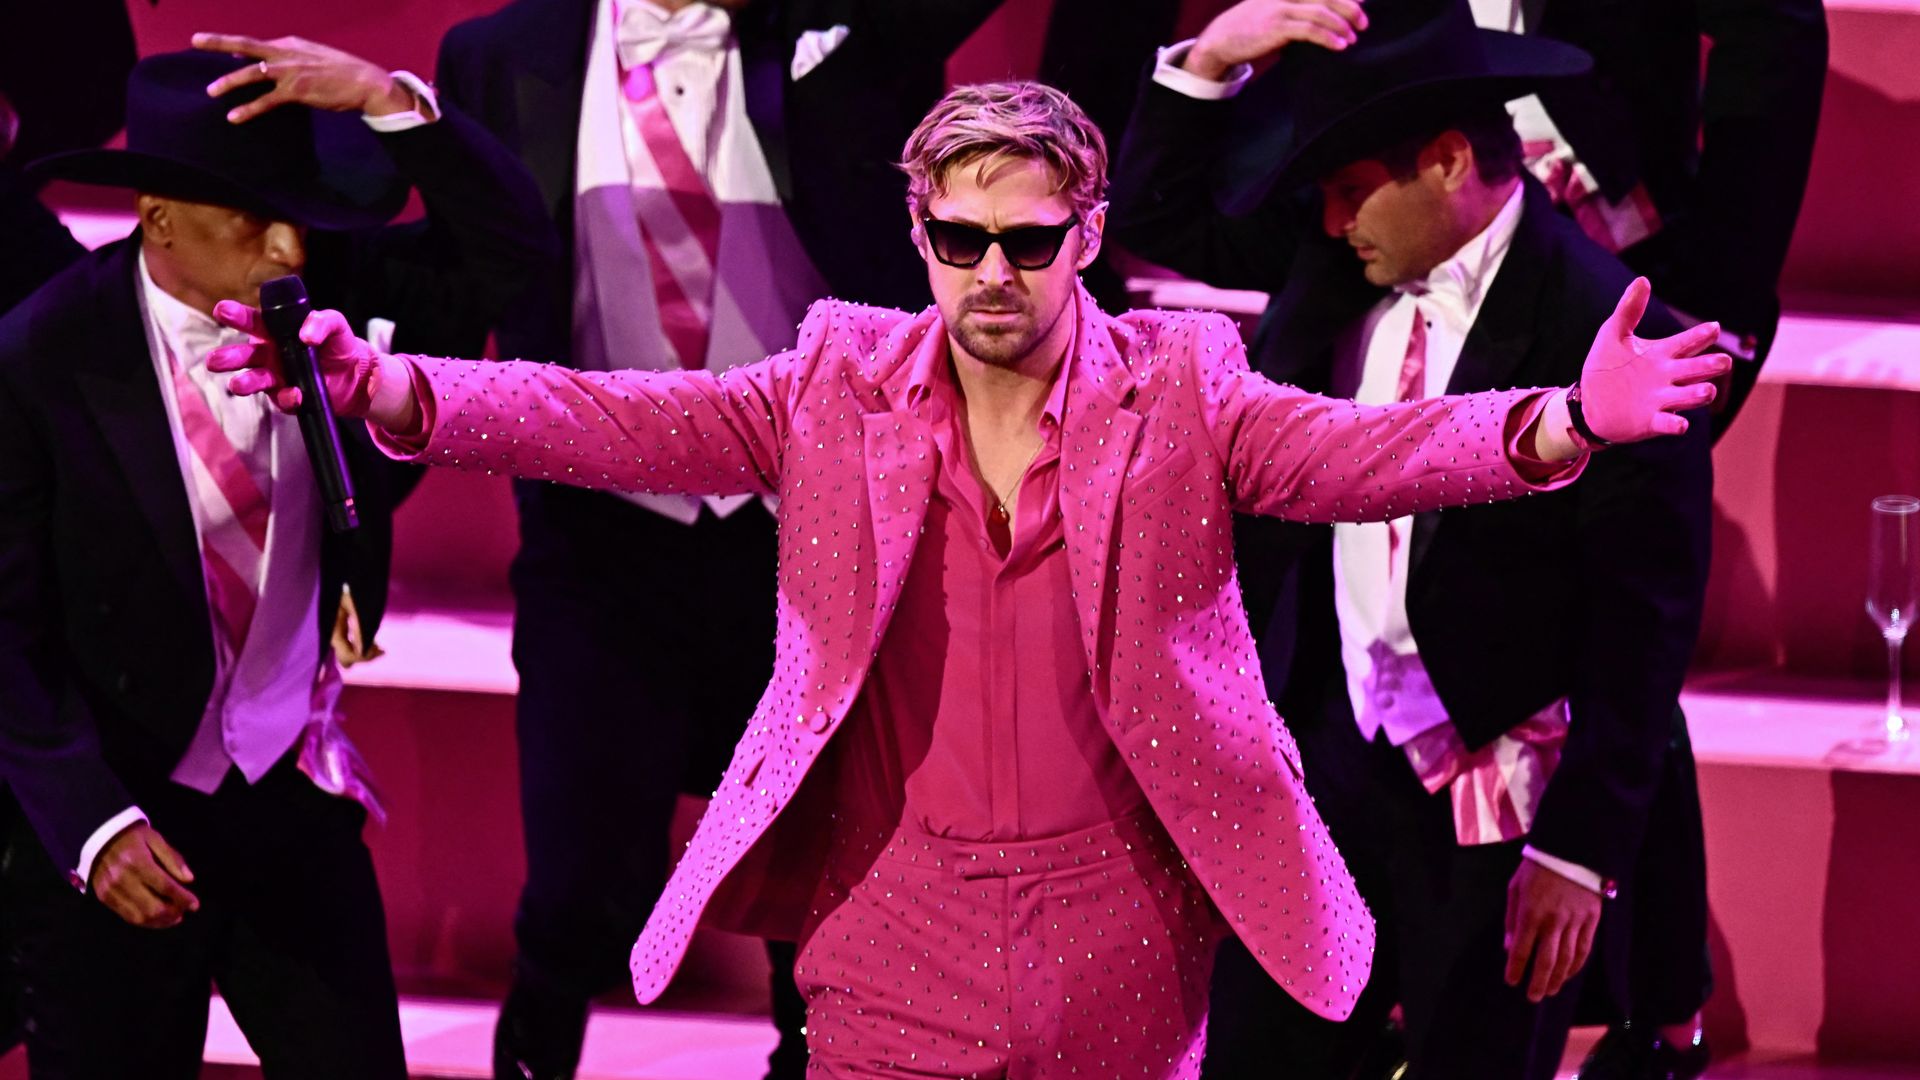 Canadian actor Ryan Gosling performs "I'm Just Ken" from "Barbie" onstage during the 96th Annual Academy Awards at the Dolby Theatre in Hollywood, California on March 10, 2024.